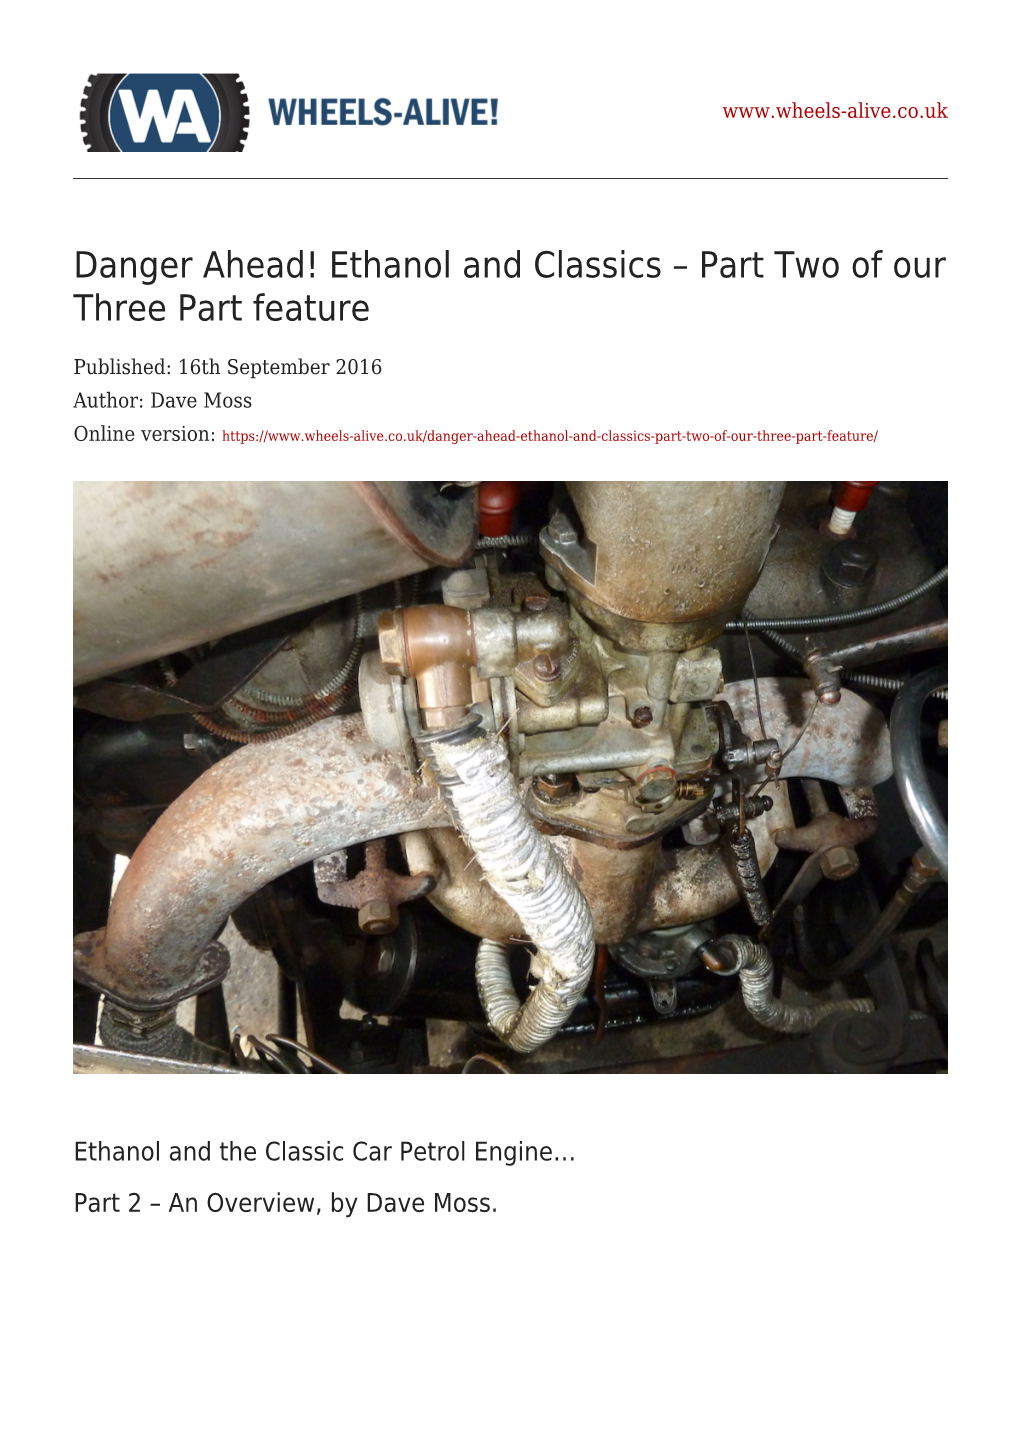 Ethanol and Classics – Part Two of Our Three Part Feature